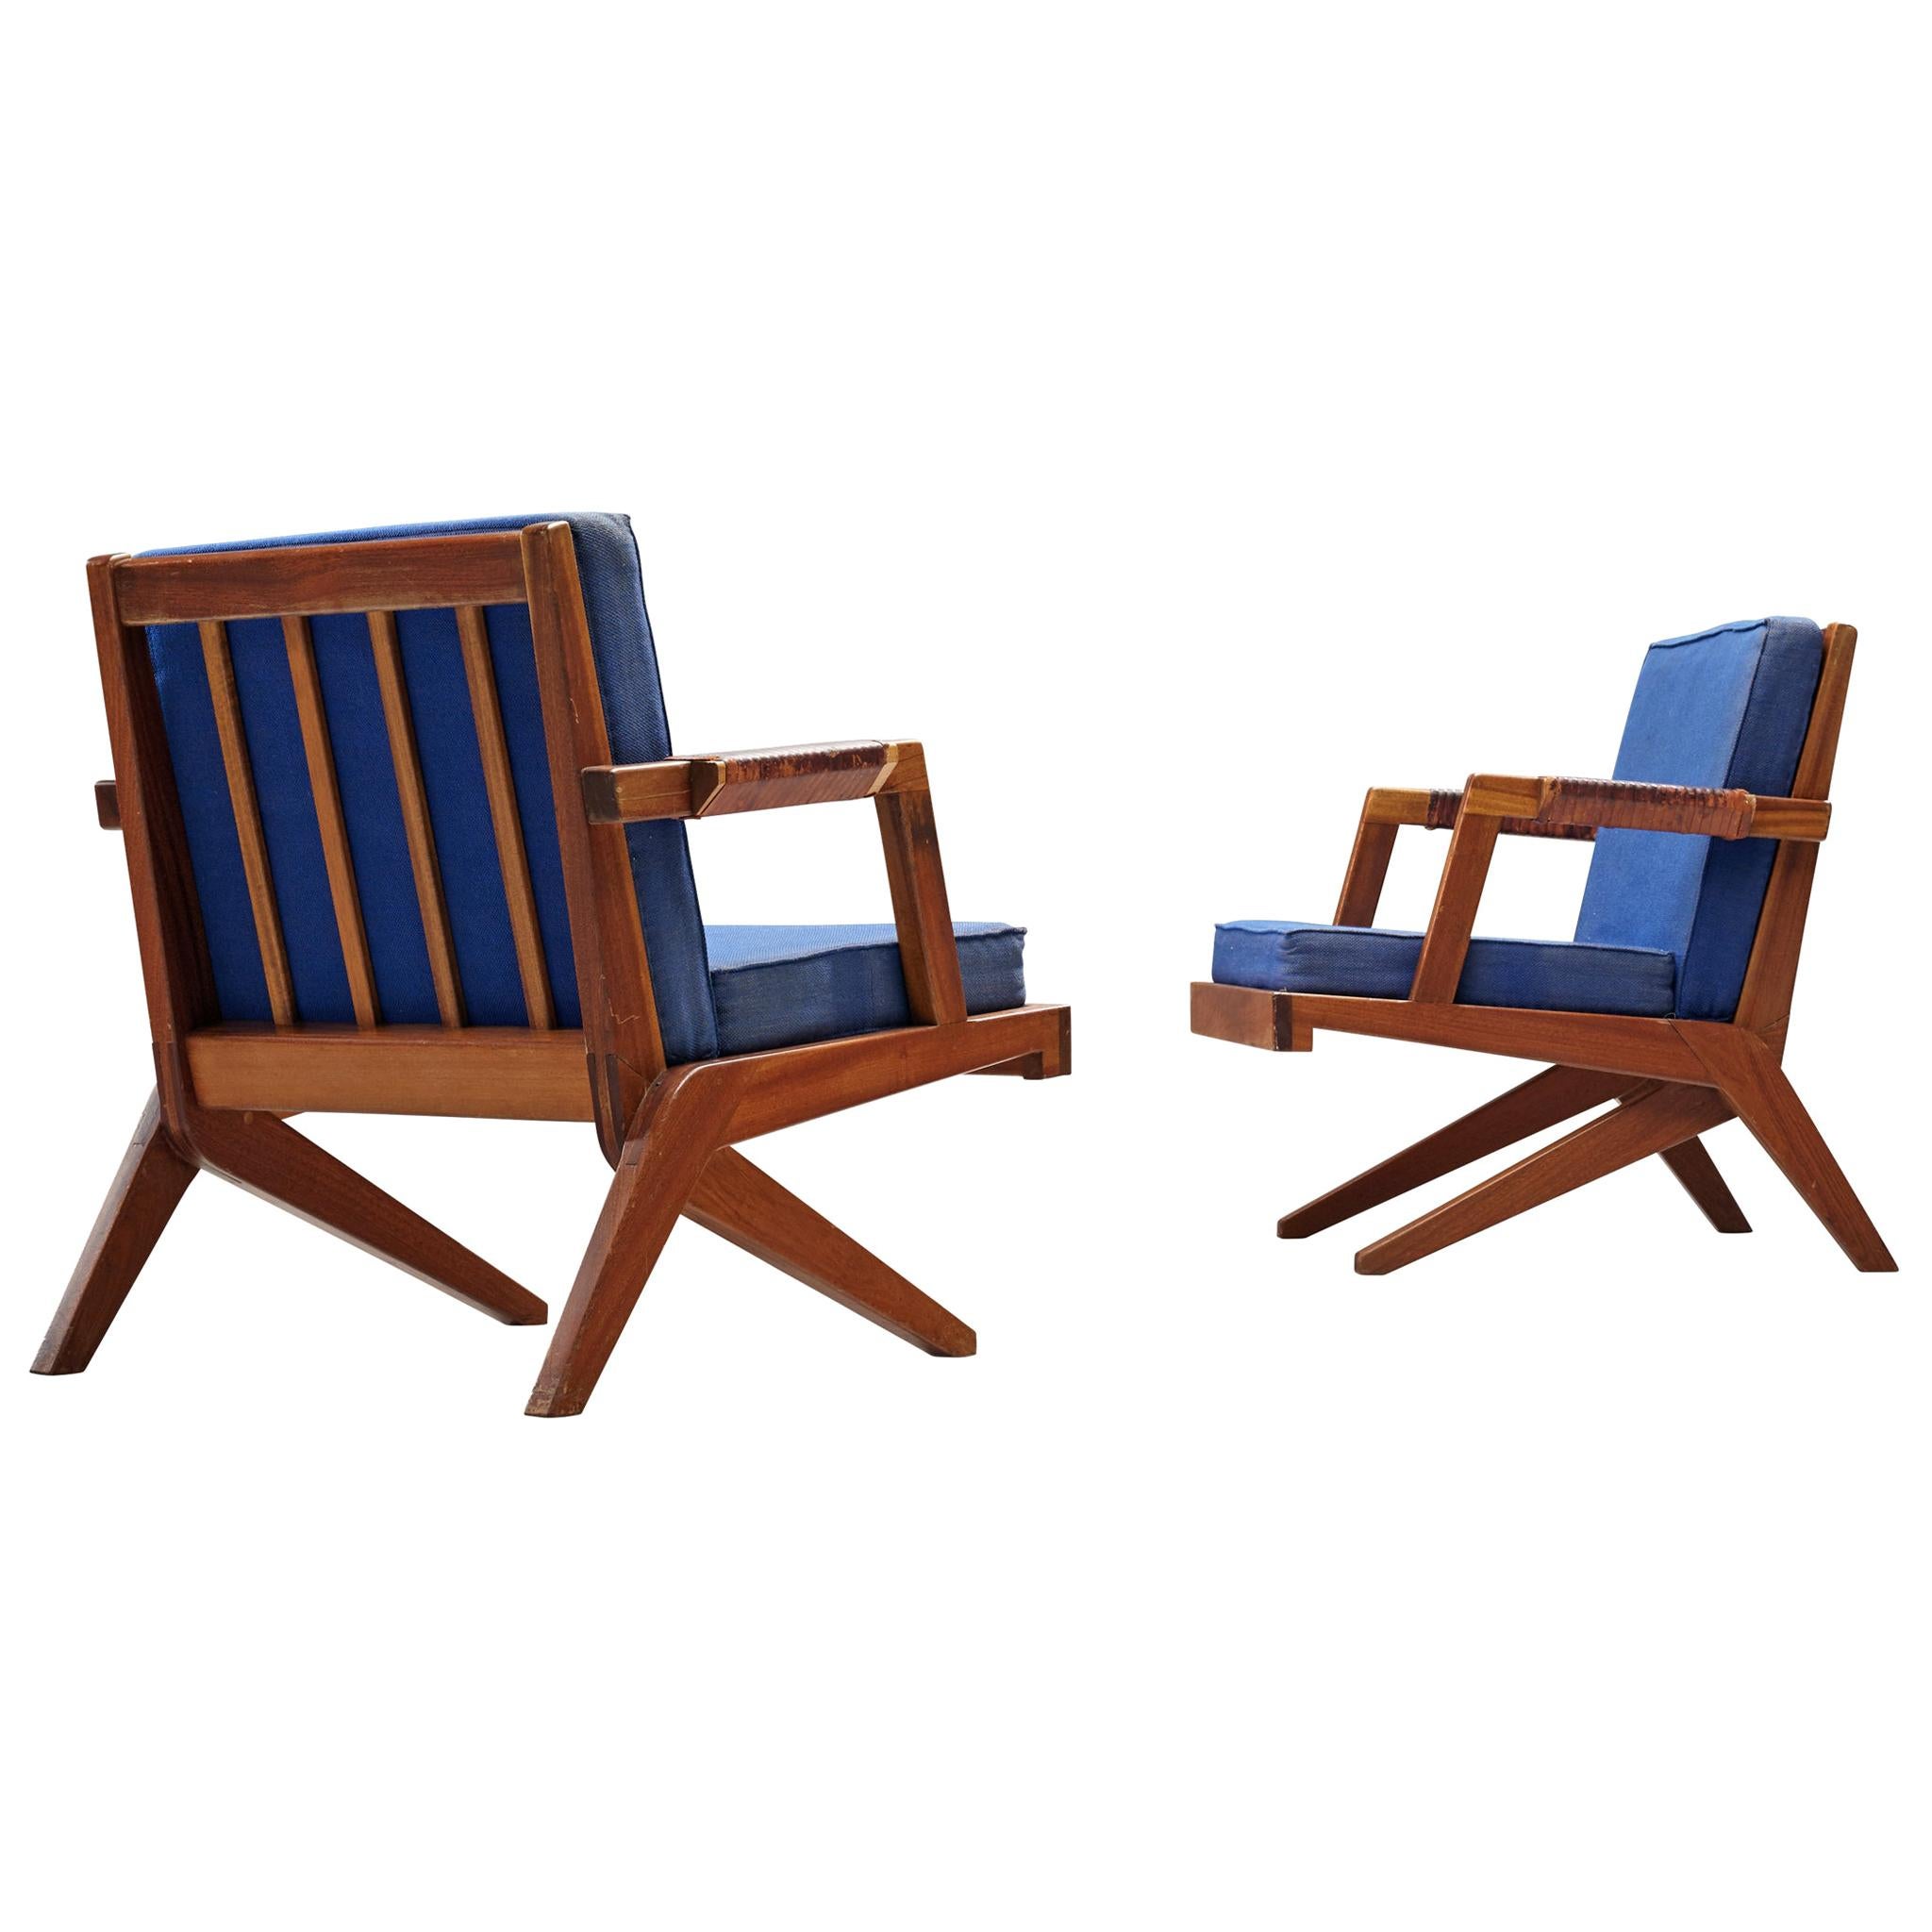 Olavi Hanninen Pair of 'Bumerang' Chairs with Kingsblue Upholstery